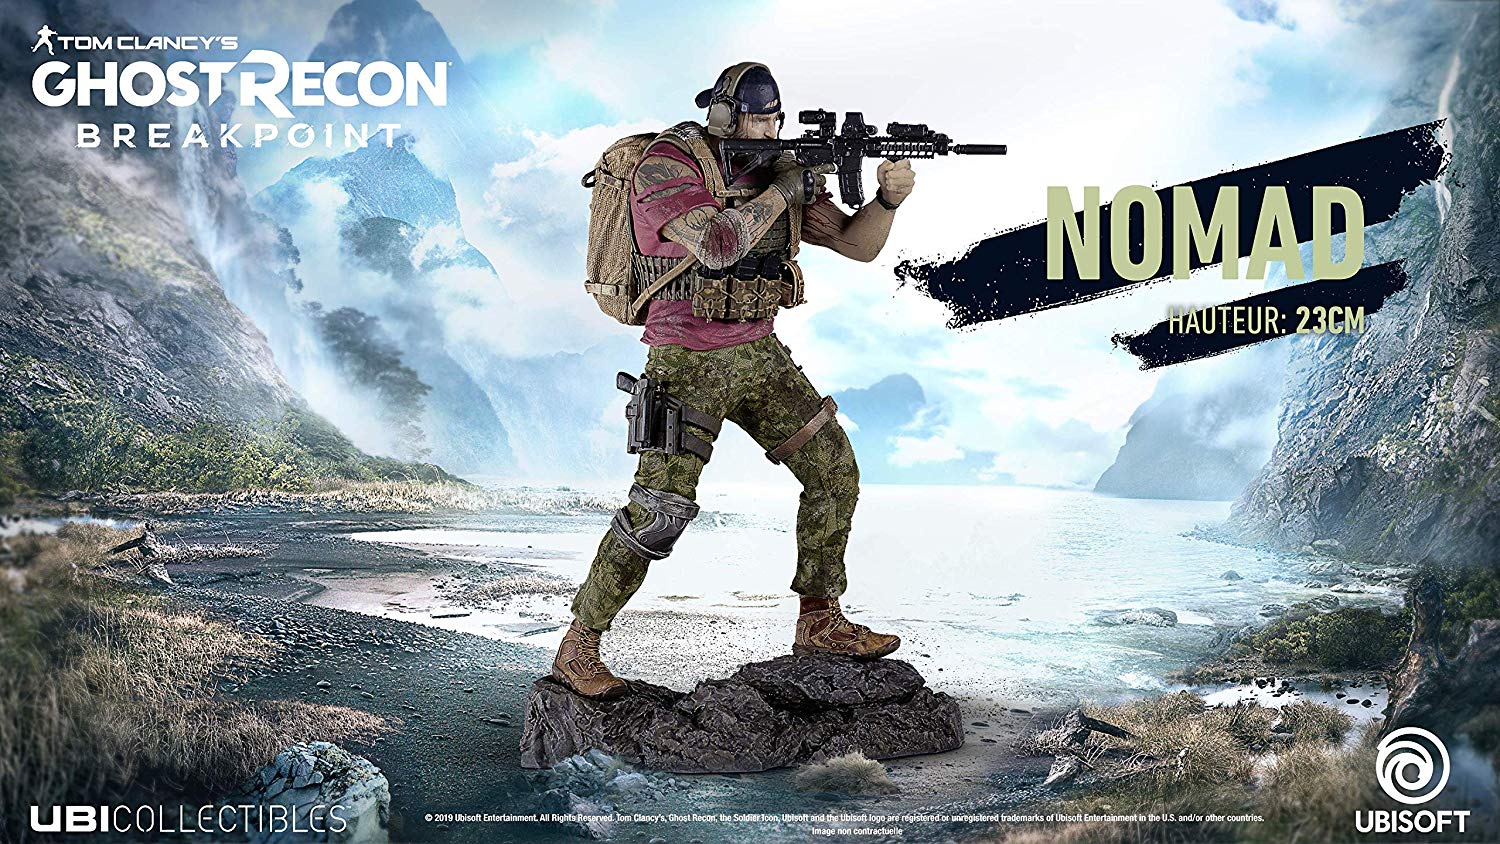 Ghost recon: breakpoint